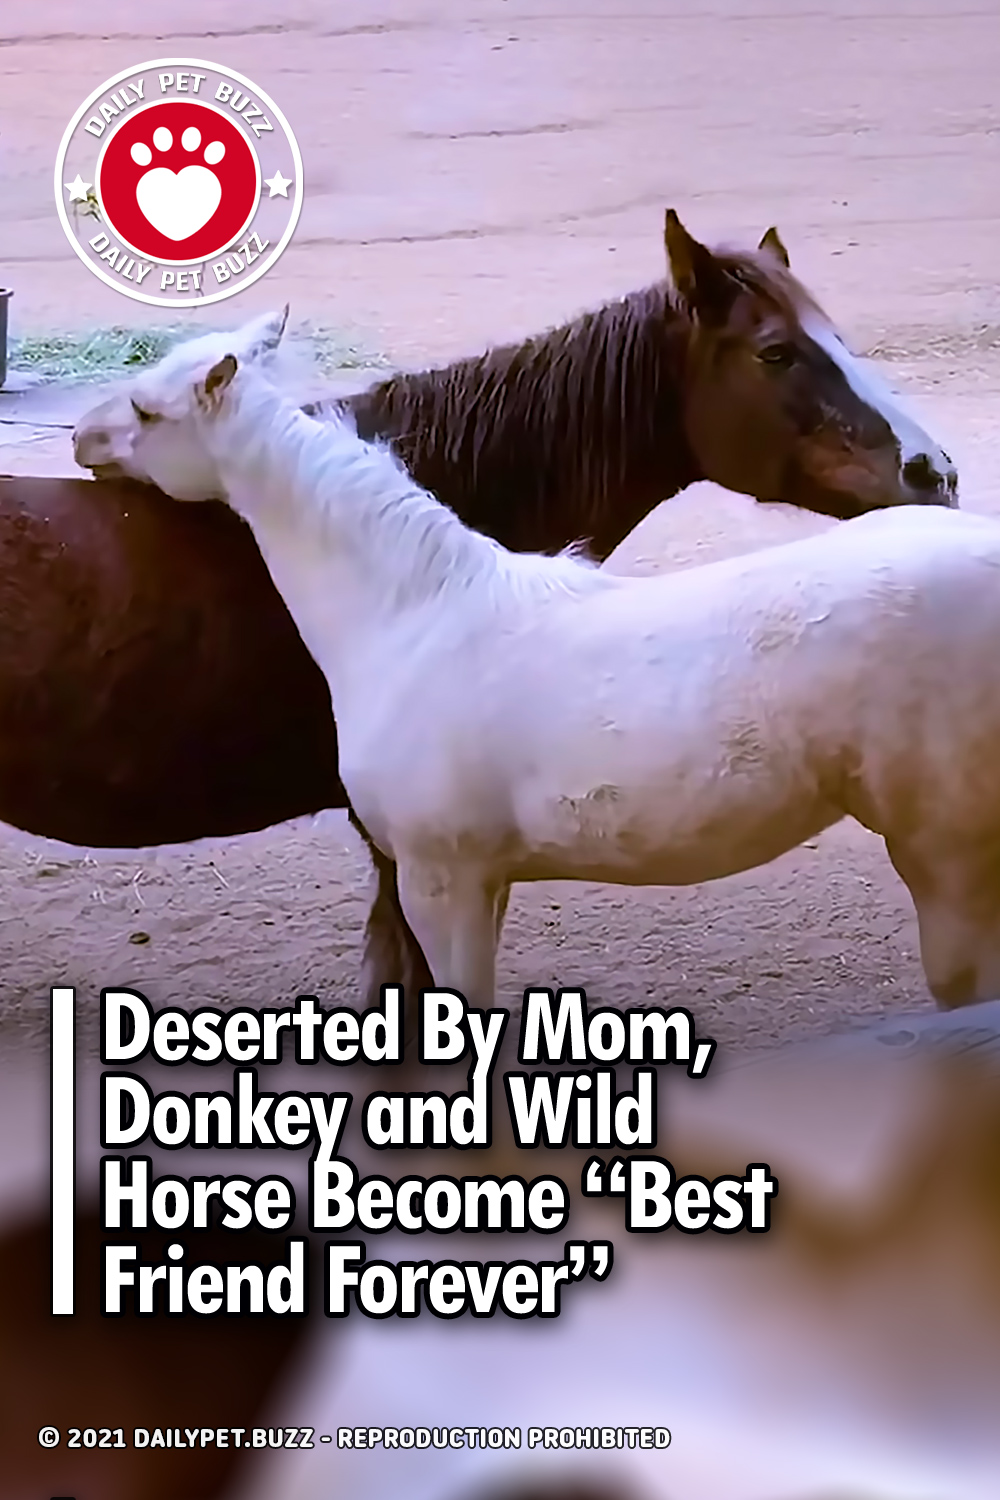 Deserted By Mom, Donkey and Wild Horse Become “Best Friend Forever”